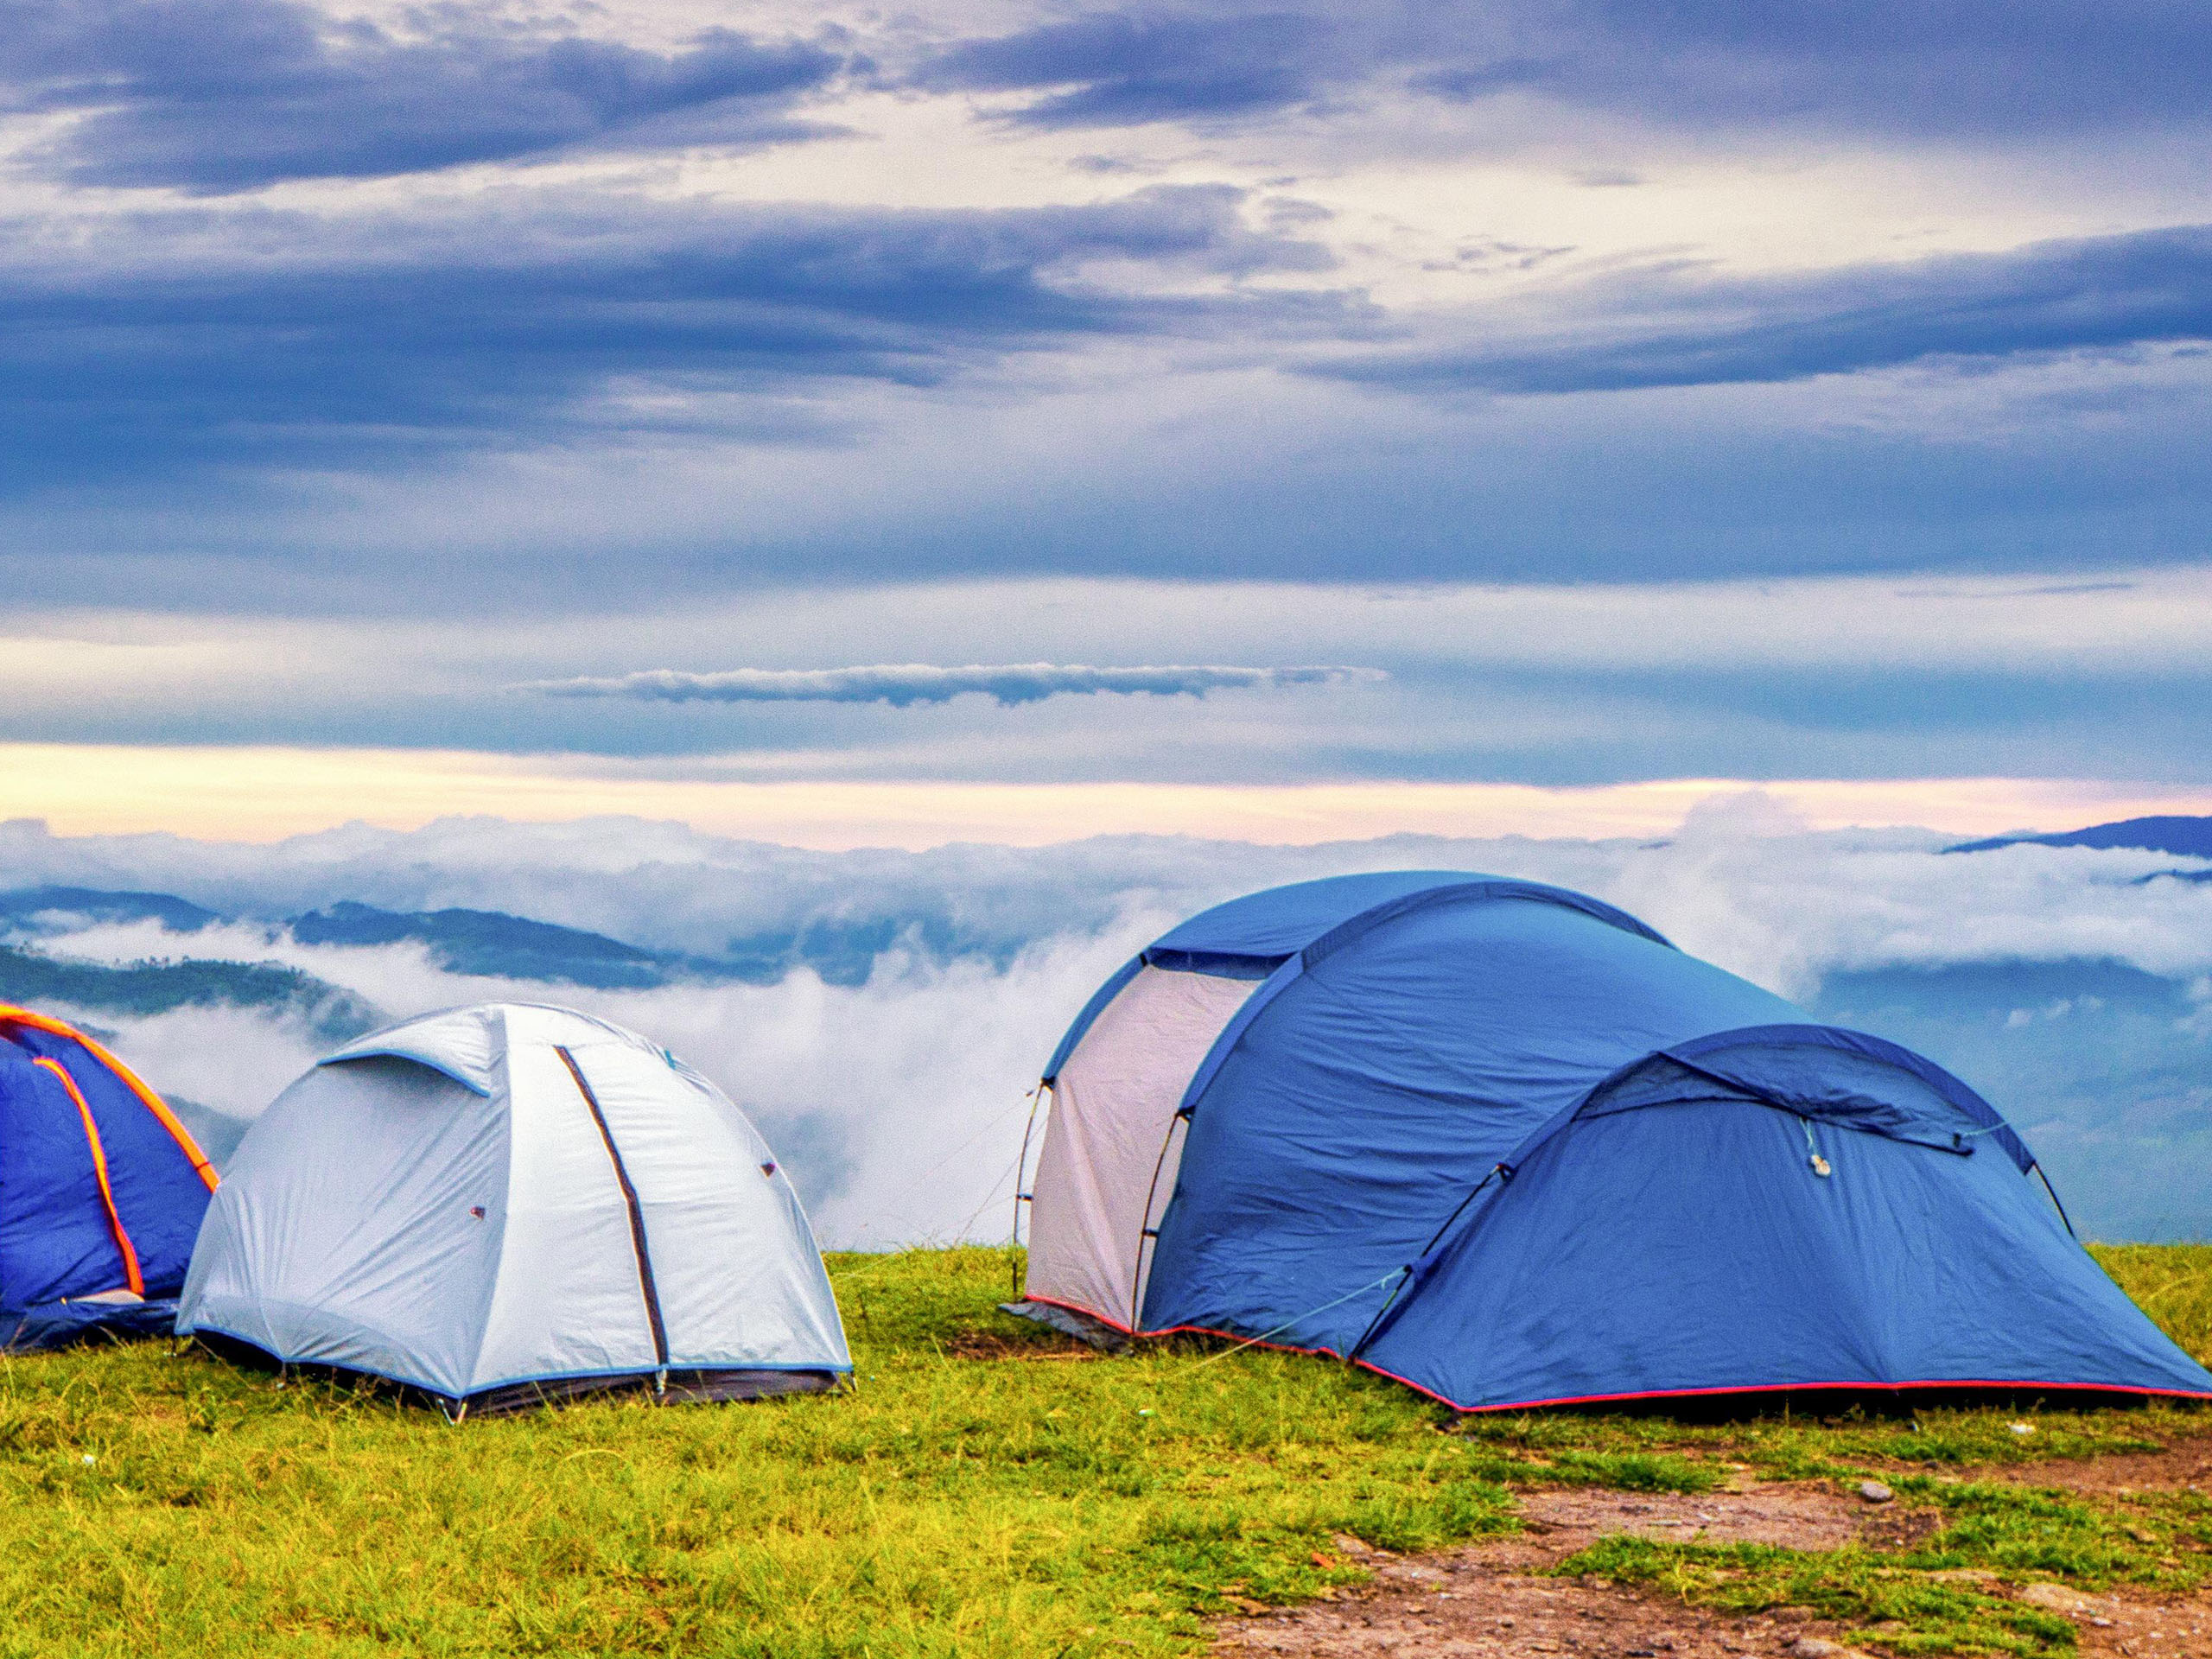 Camping is the most economical option along the Walker’s Haute Route